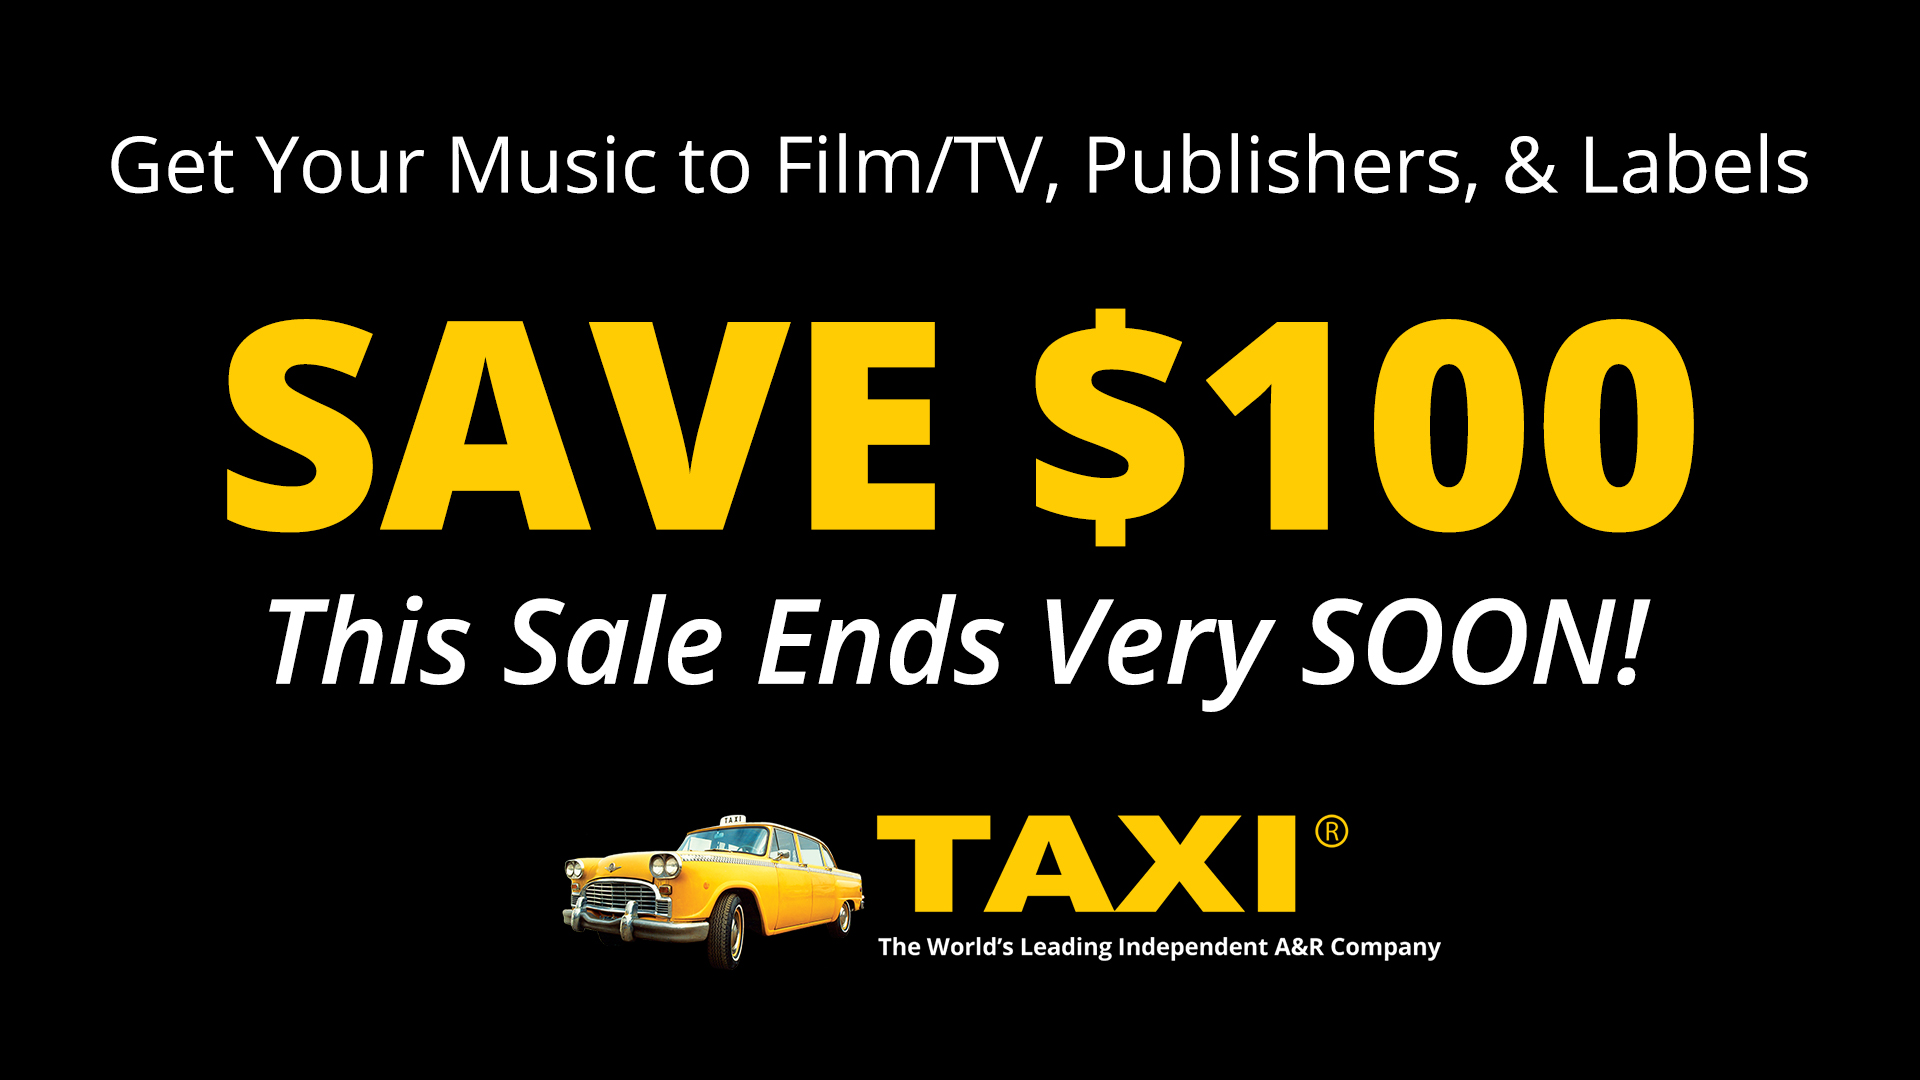 SAVE $100 on TAXI - This Sale Ends SOON!